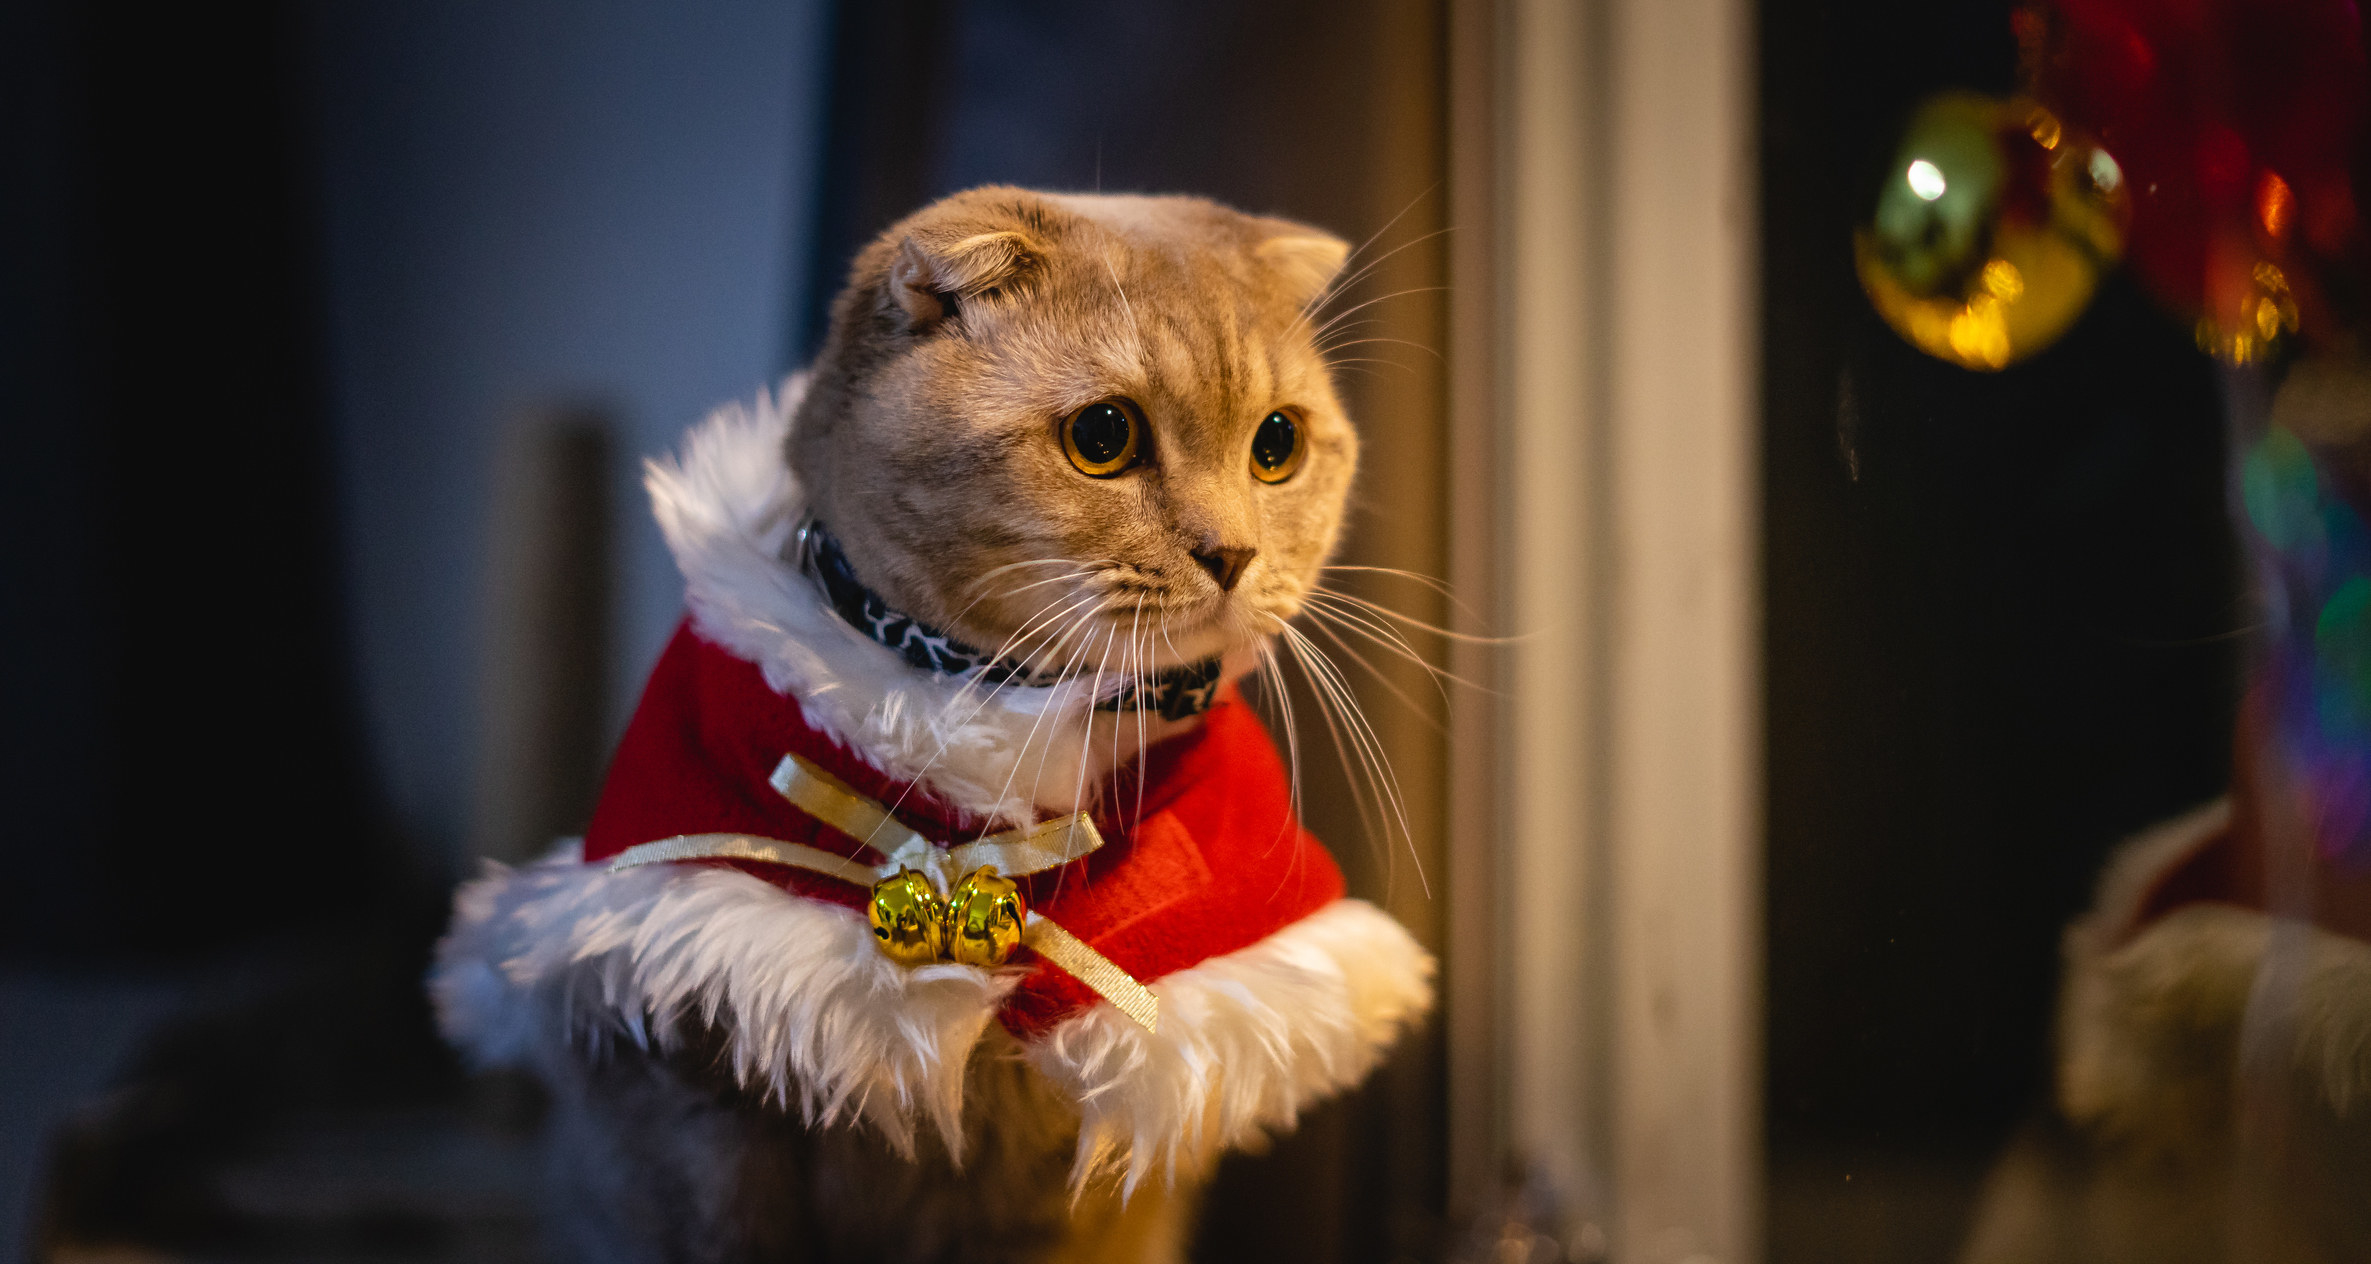 cat with ears down in santa costume